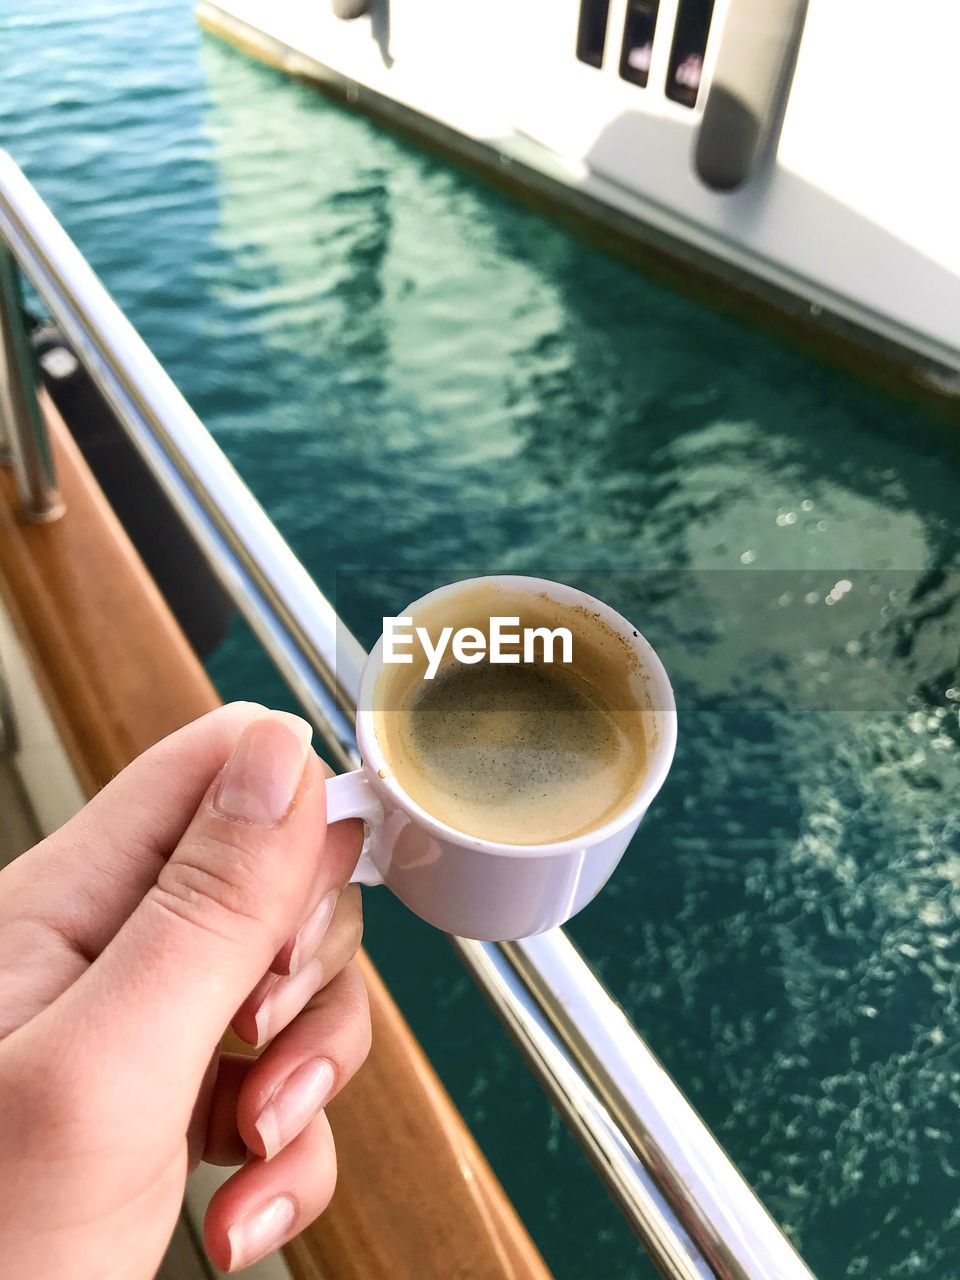 CROPPED IMAGE OF HAND HOLDING COFFEE CUP WITH WATER